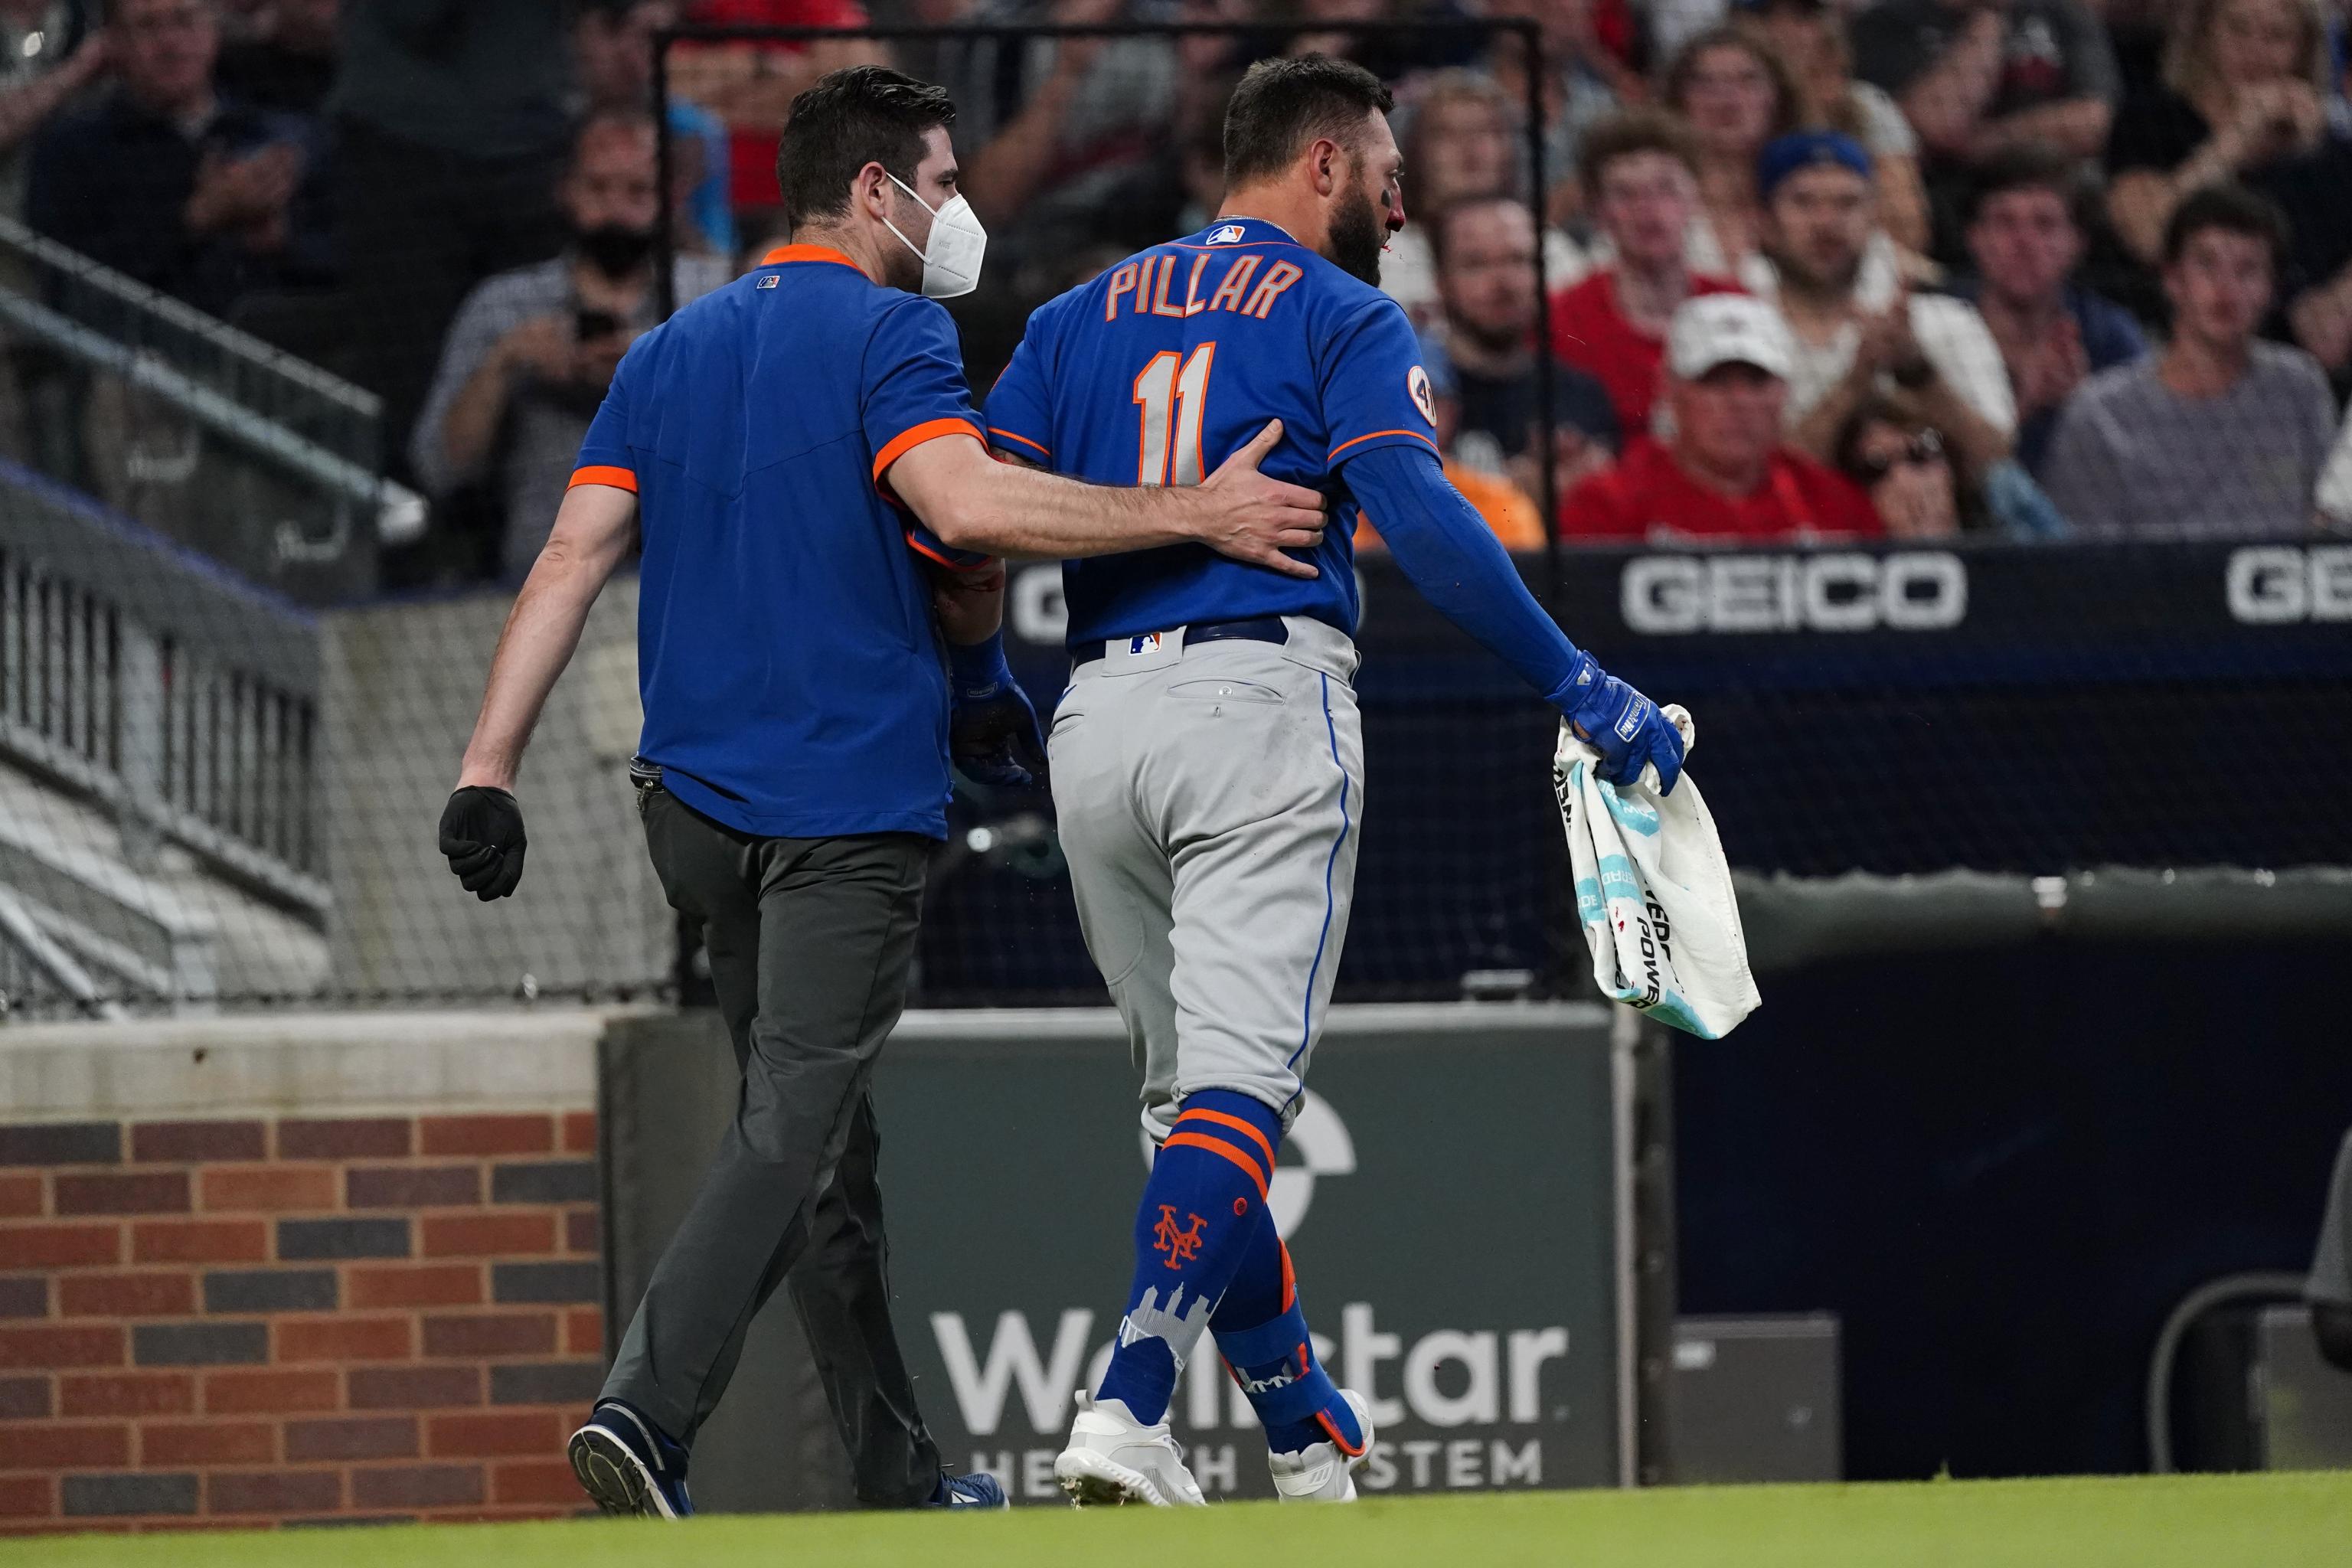 Kevin Pillar injury update: Mets OF suffered 'multiple nasal fractures'  from fastball to face